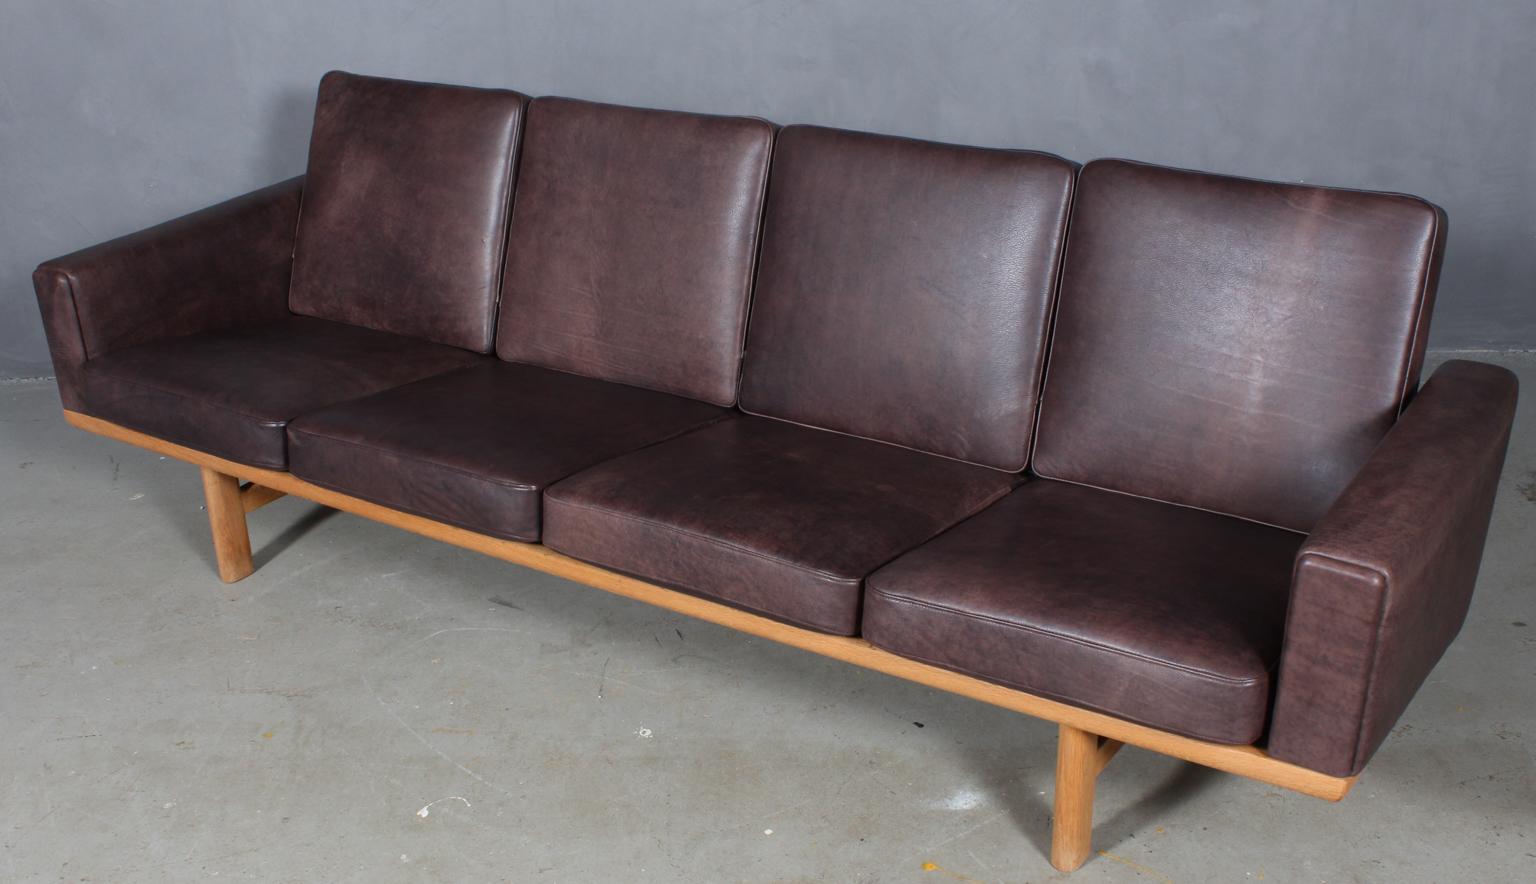 Hans J. Wegner four-seat sofa new upholstered with mokka aniline leather.

Original Epeda cushions.

Frame in solid oak.

Model 236/4, produced by GETAMA.